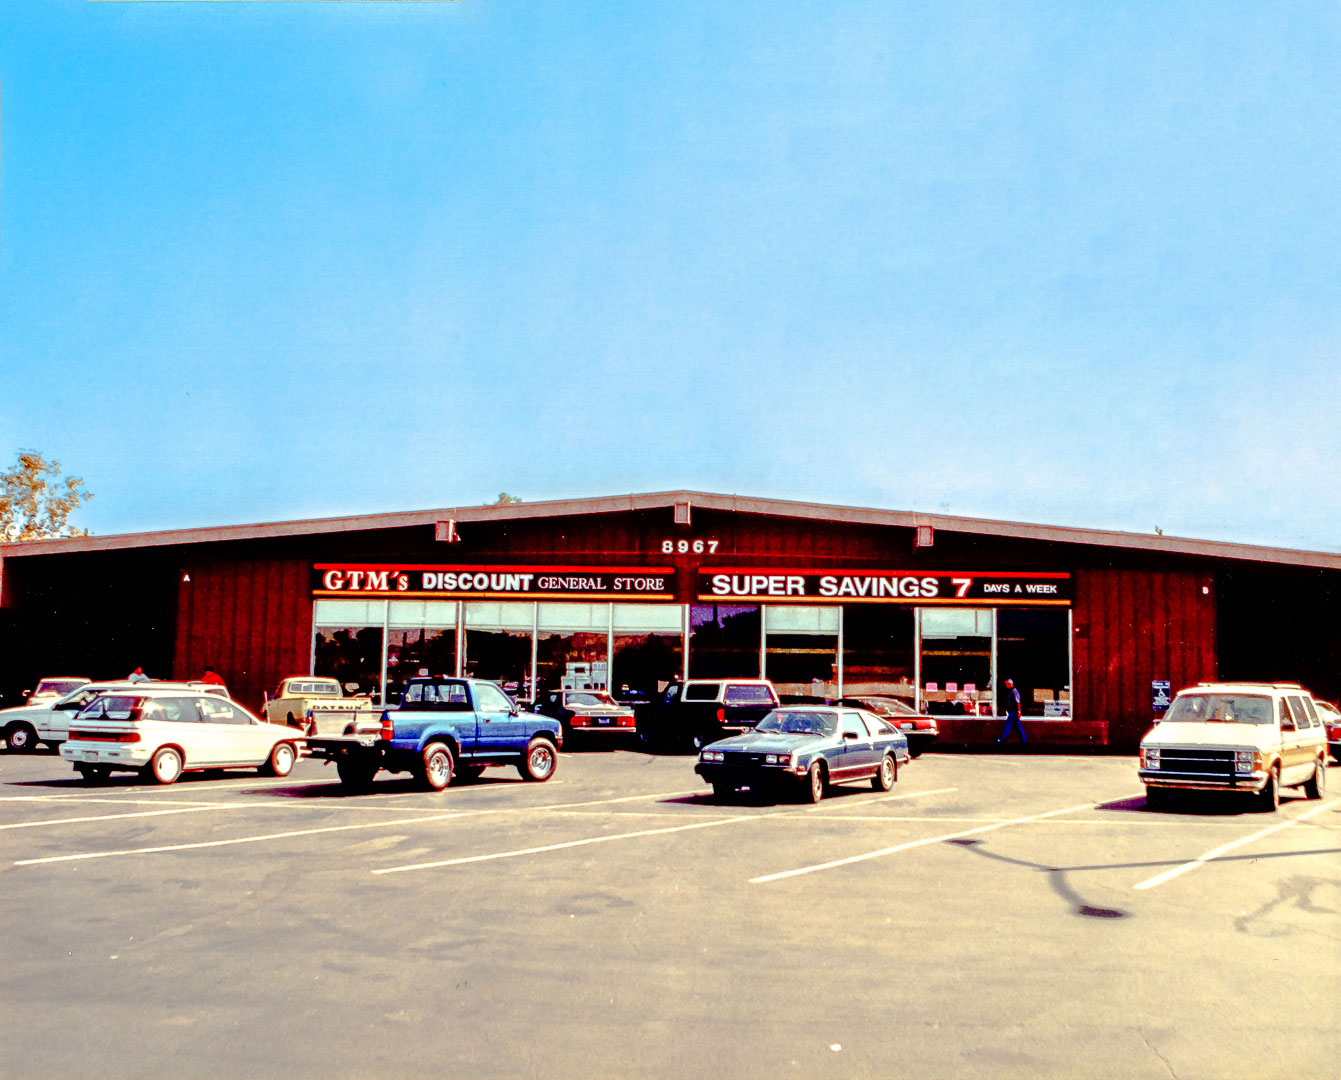 santee gtm store on carlton hills off west mission gorge road